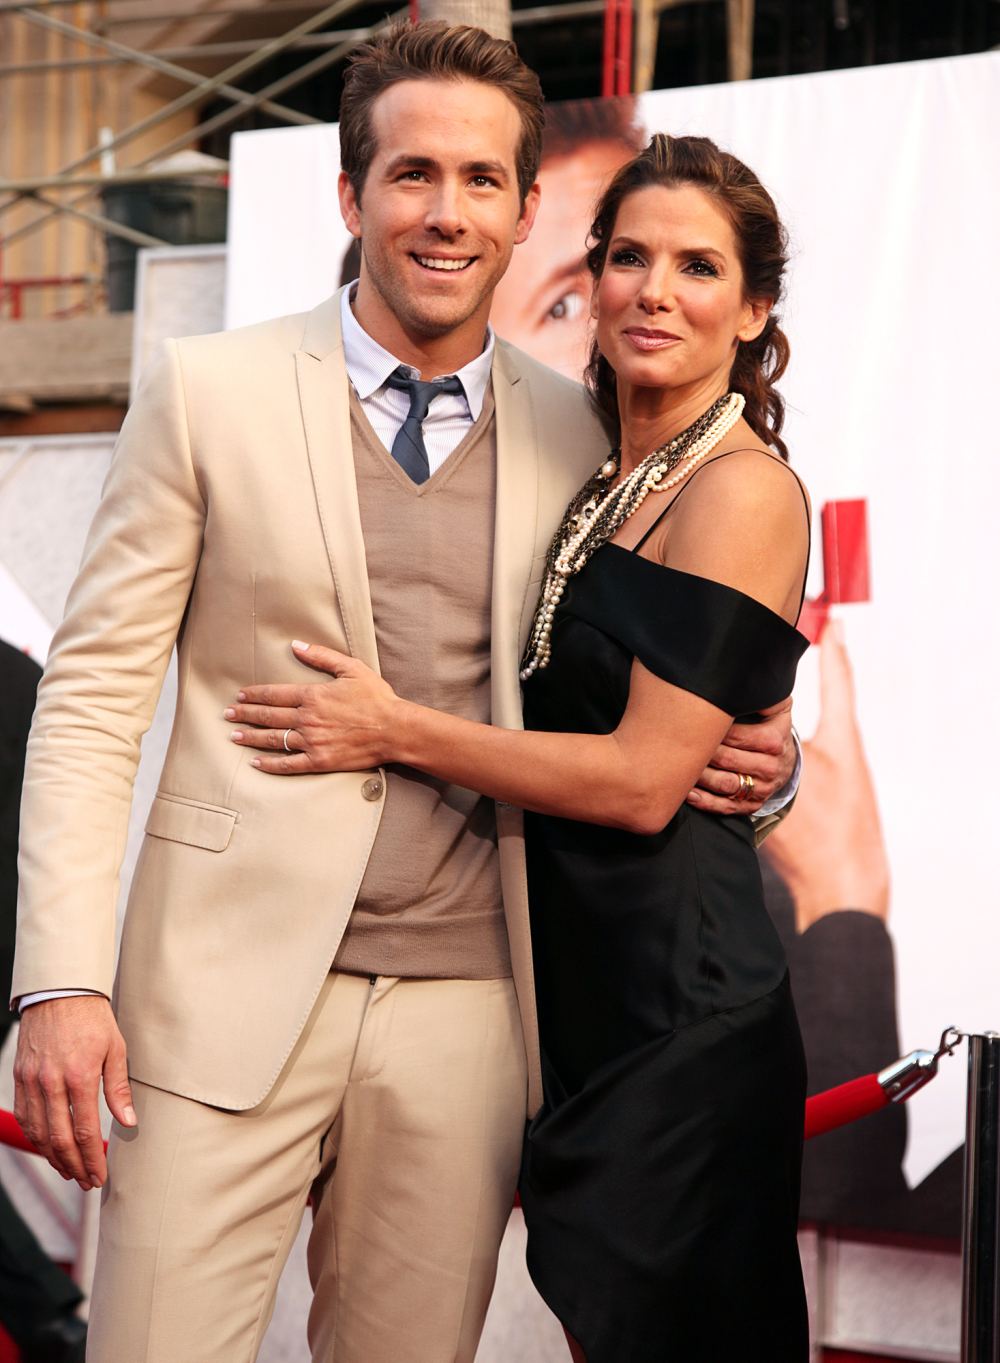 The Truth About Ryan Reynolds And Sandra Bullock's Friendship